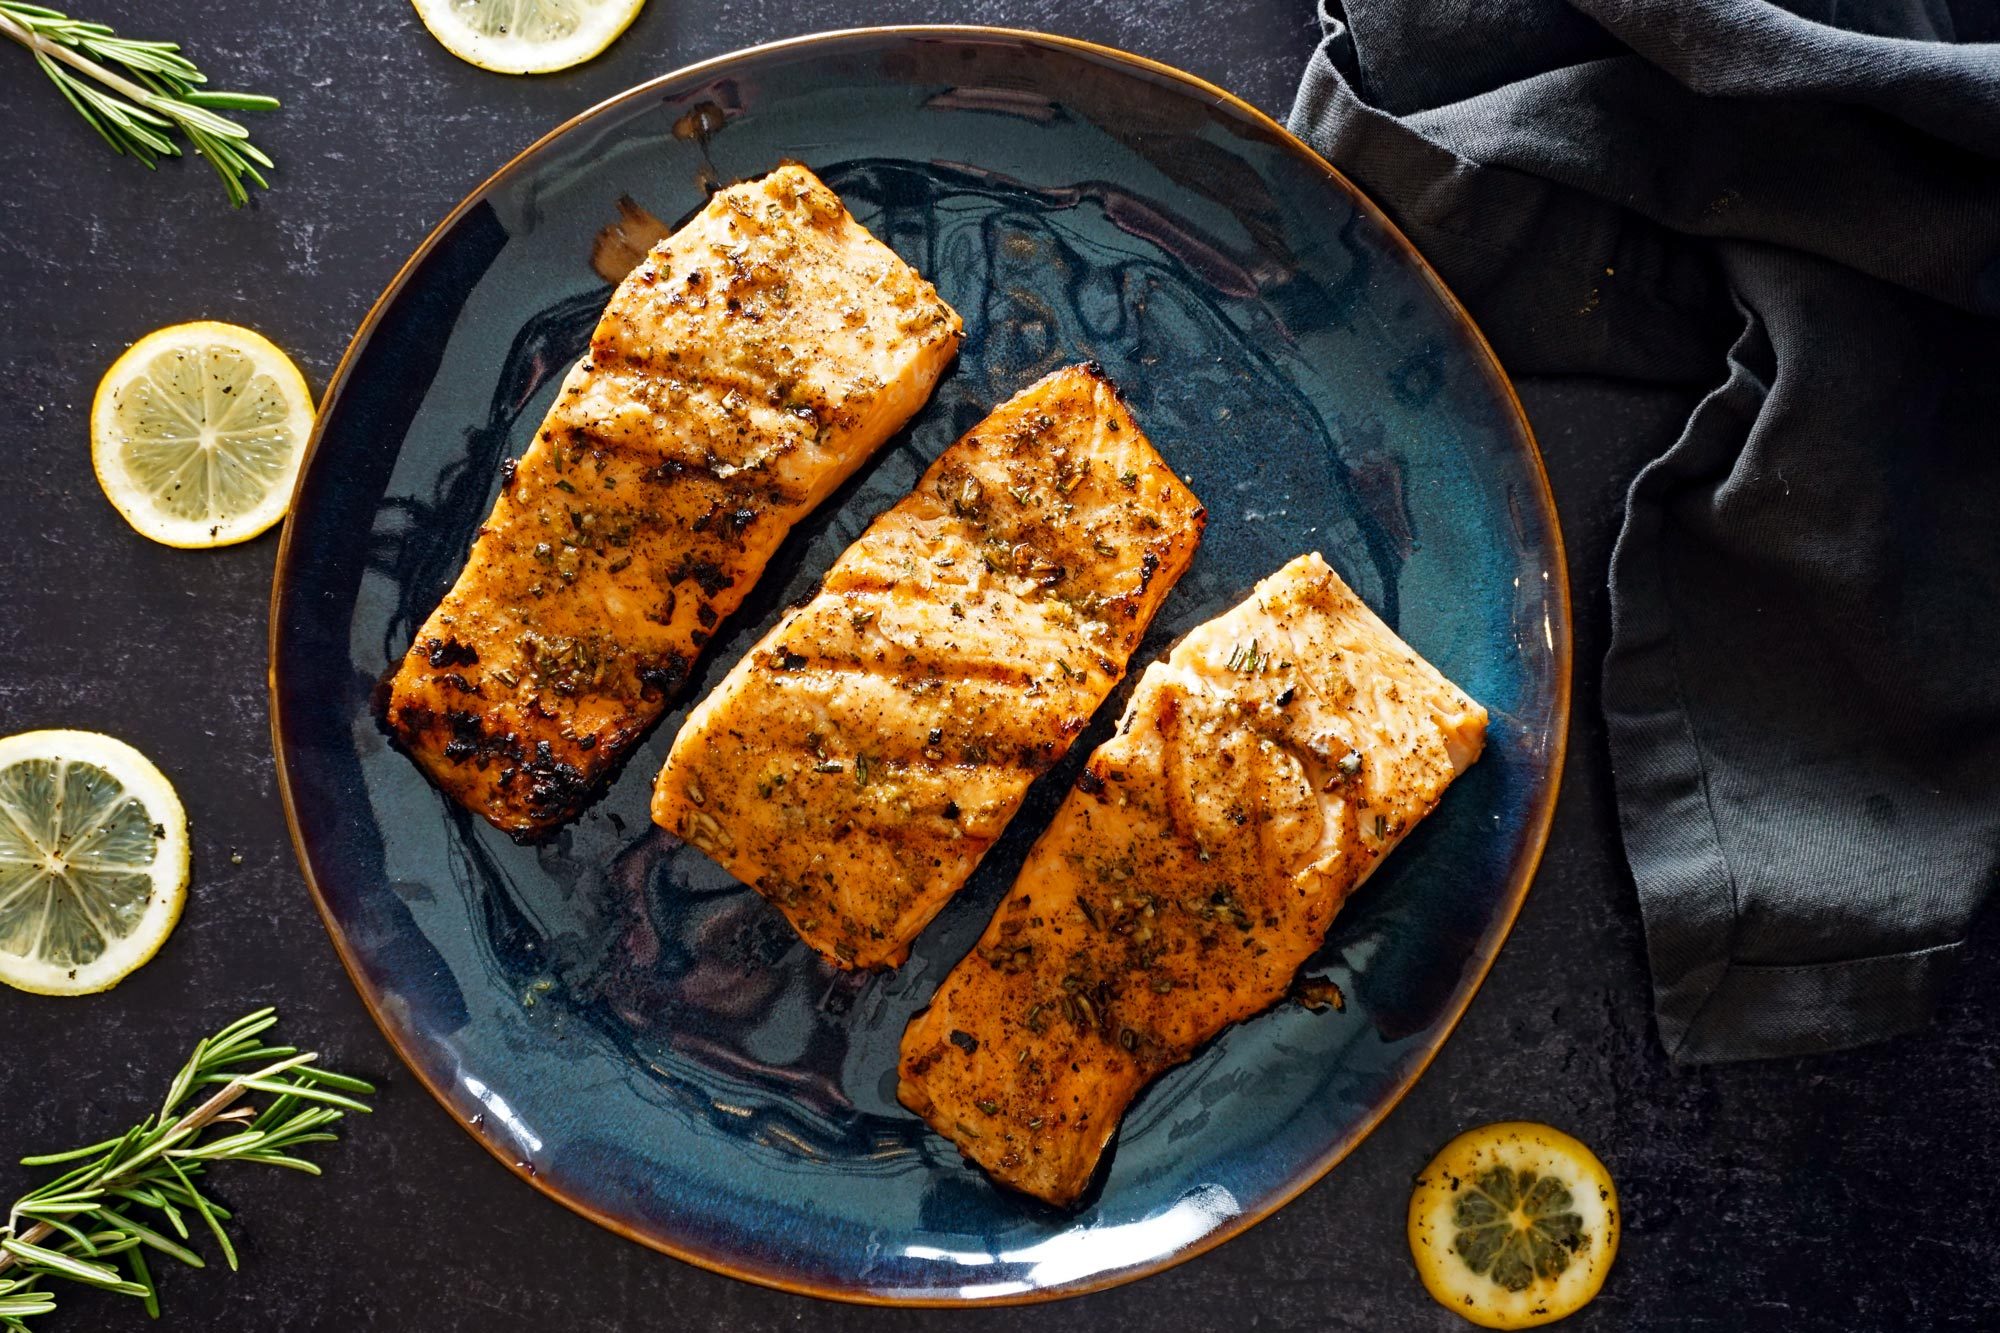 Grilled Salmon Recipe + Guide for Beginners | Taste of Home